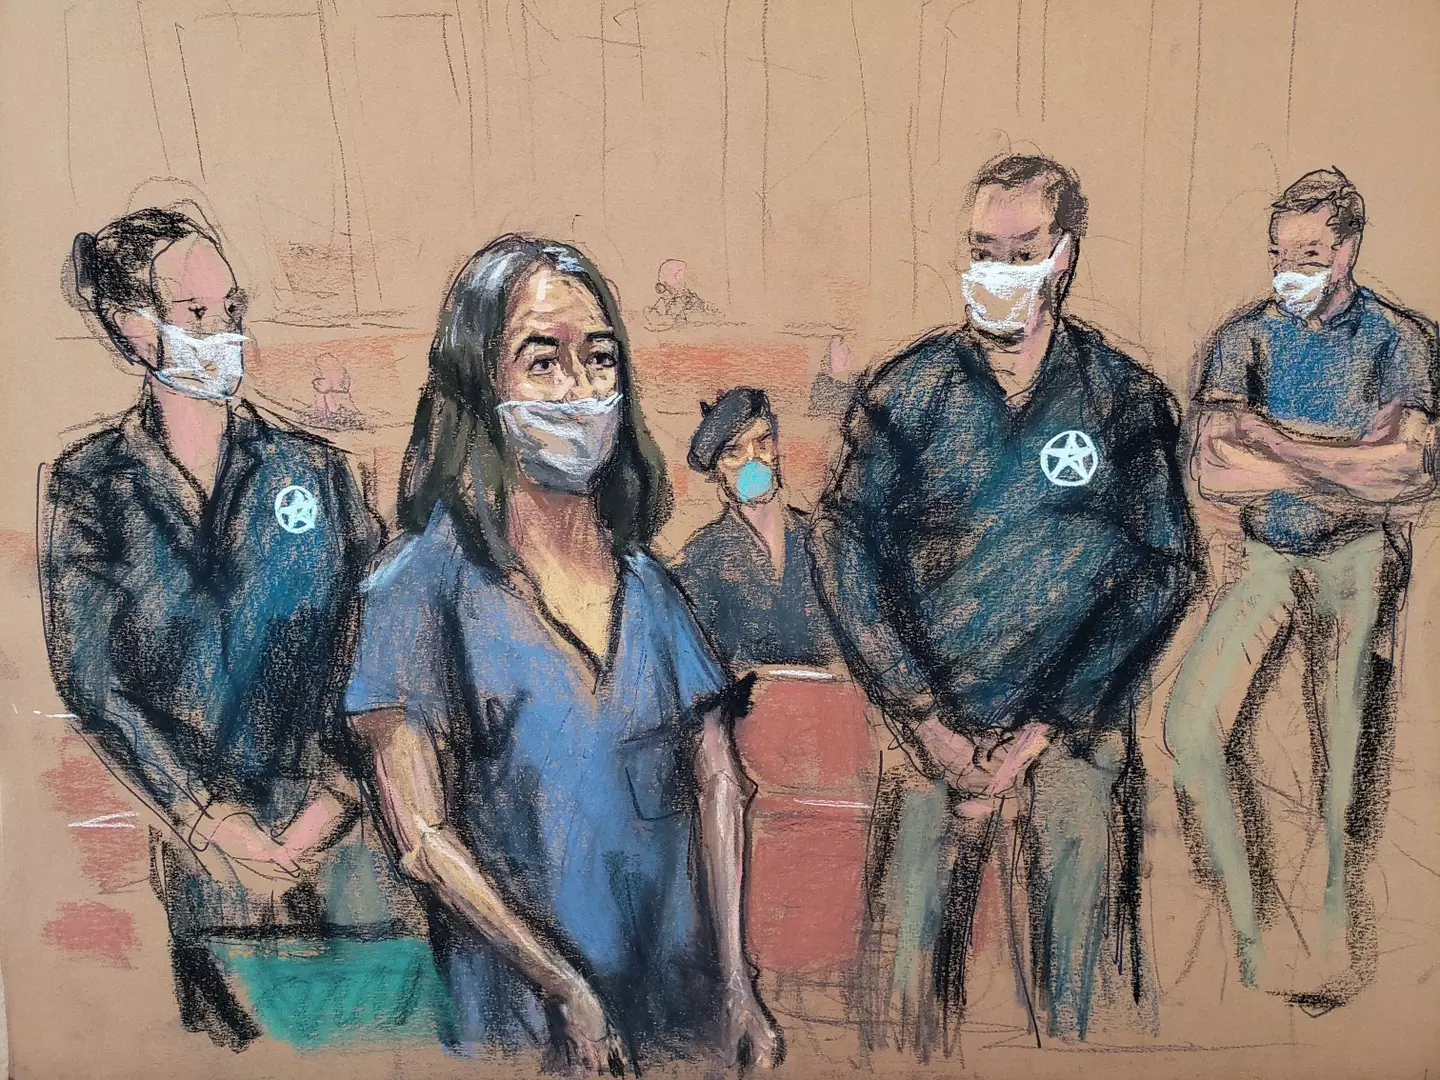 Courtroom sketch of Ghislaine Maxwell.